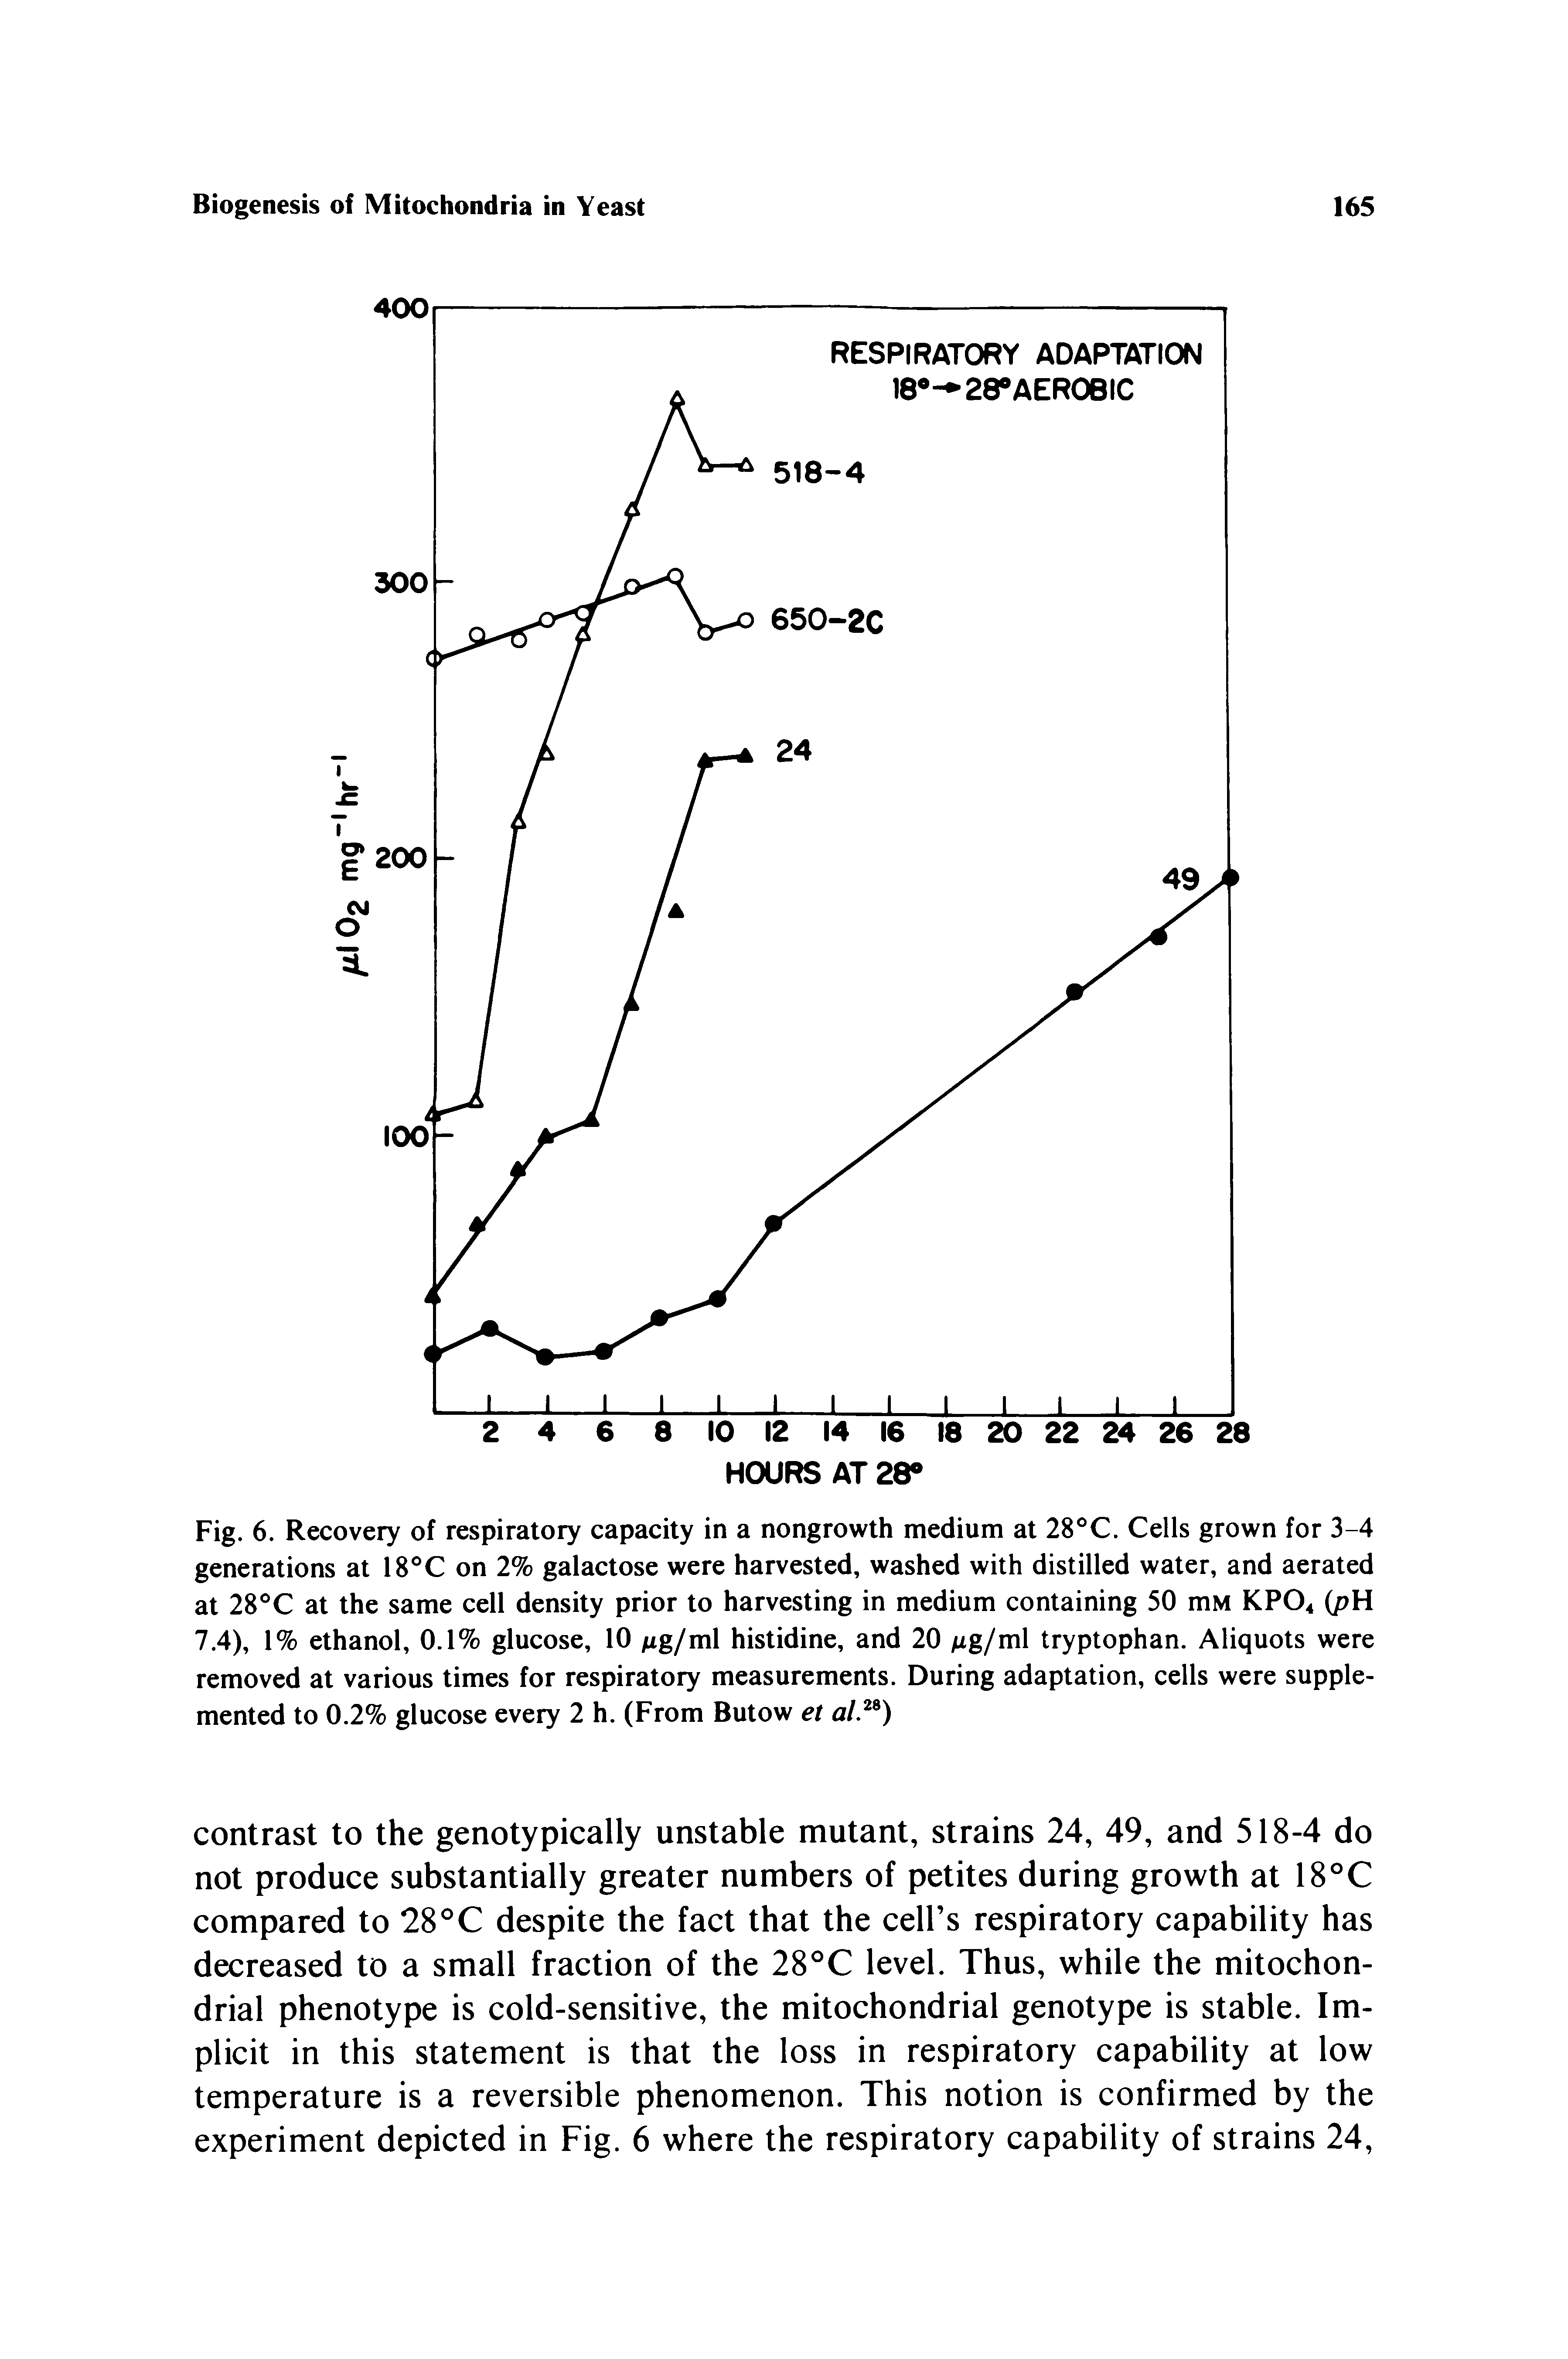 Fig. 6. Recovery of respiratory capacity in a nongrowth medium at 28 C. Cells grown for 3-4 generations at 18 C on 2% galactose were harvested, washed with distilled water, and aerated at 28 C at the same cell density prior to harvesting in medium containing 50 mM KPO4 (pH 7.4), 1% ethanol, 0.1% glucose, 10 Mg/ml histidine, and 20 Mg/ml tryptophan. Aliquots were removed at various times for respiratory measurements. During adaptation, cells were supplemented to 0.2% glucose every 2 h. (From Butow et al )...